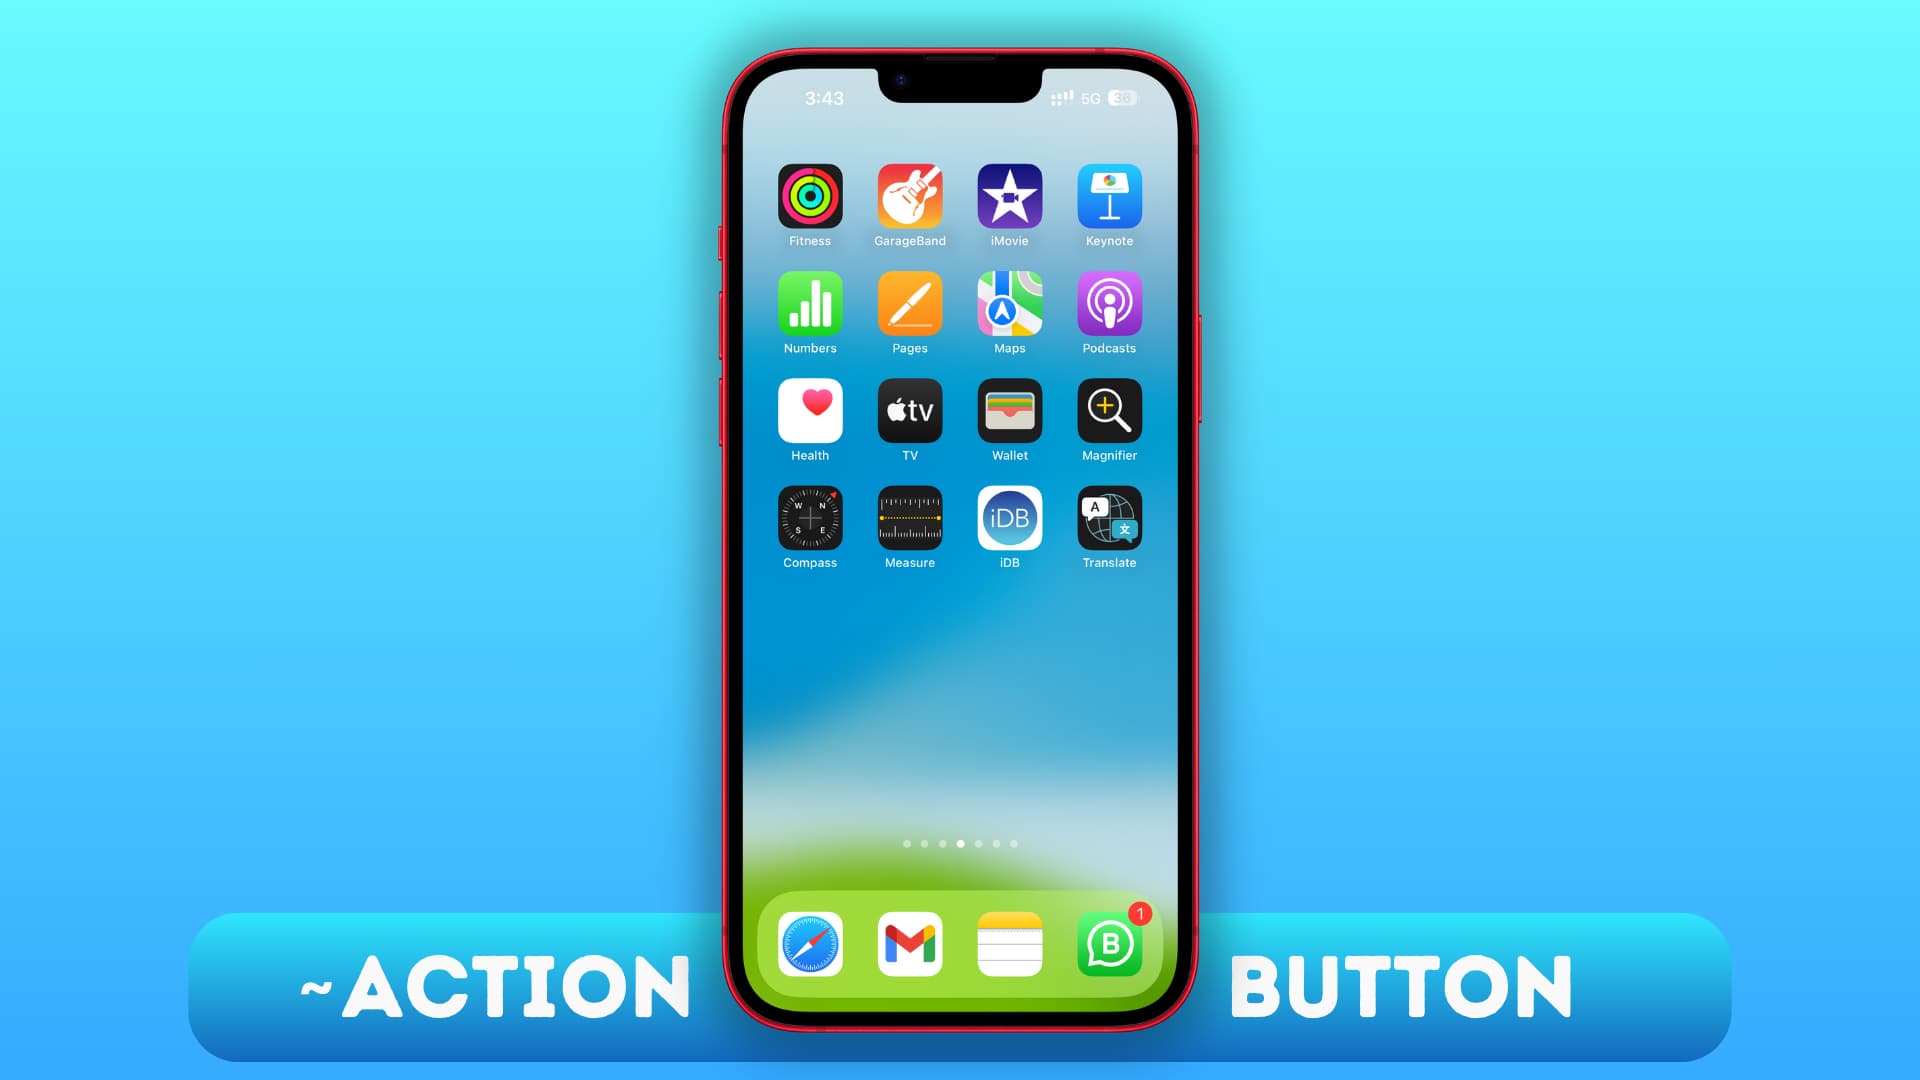 Action button on old iPhone